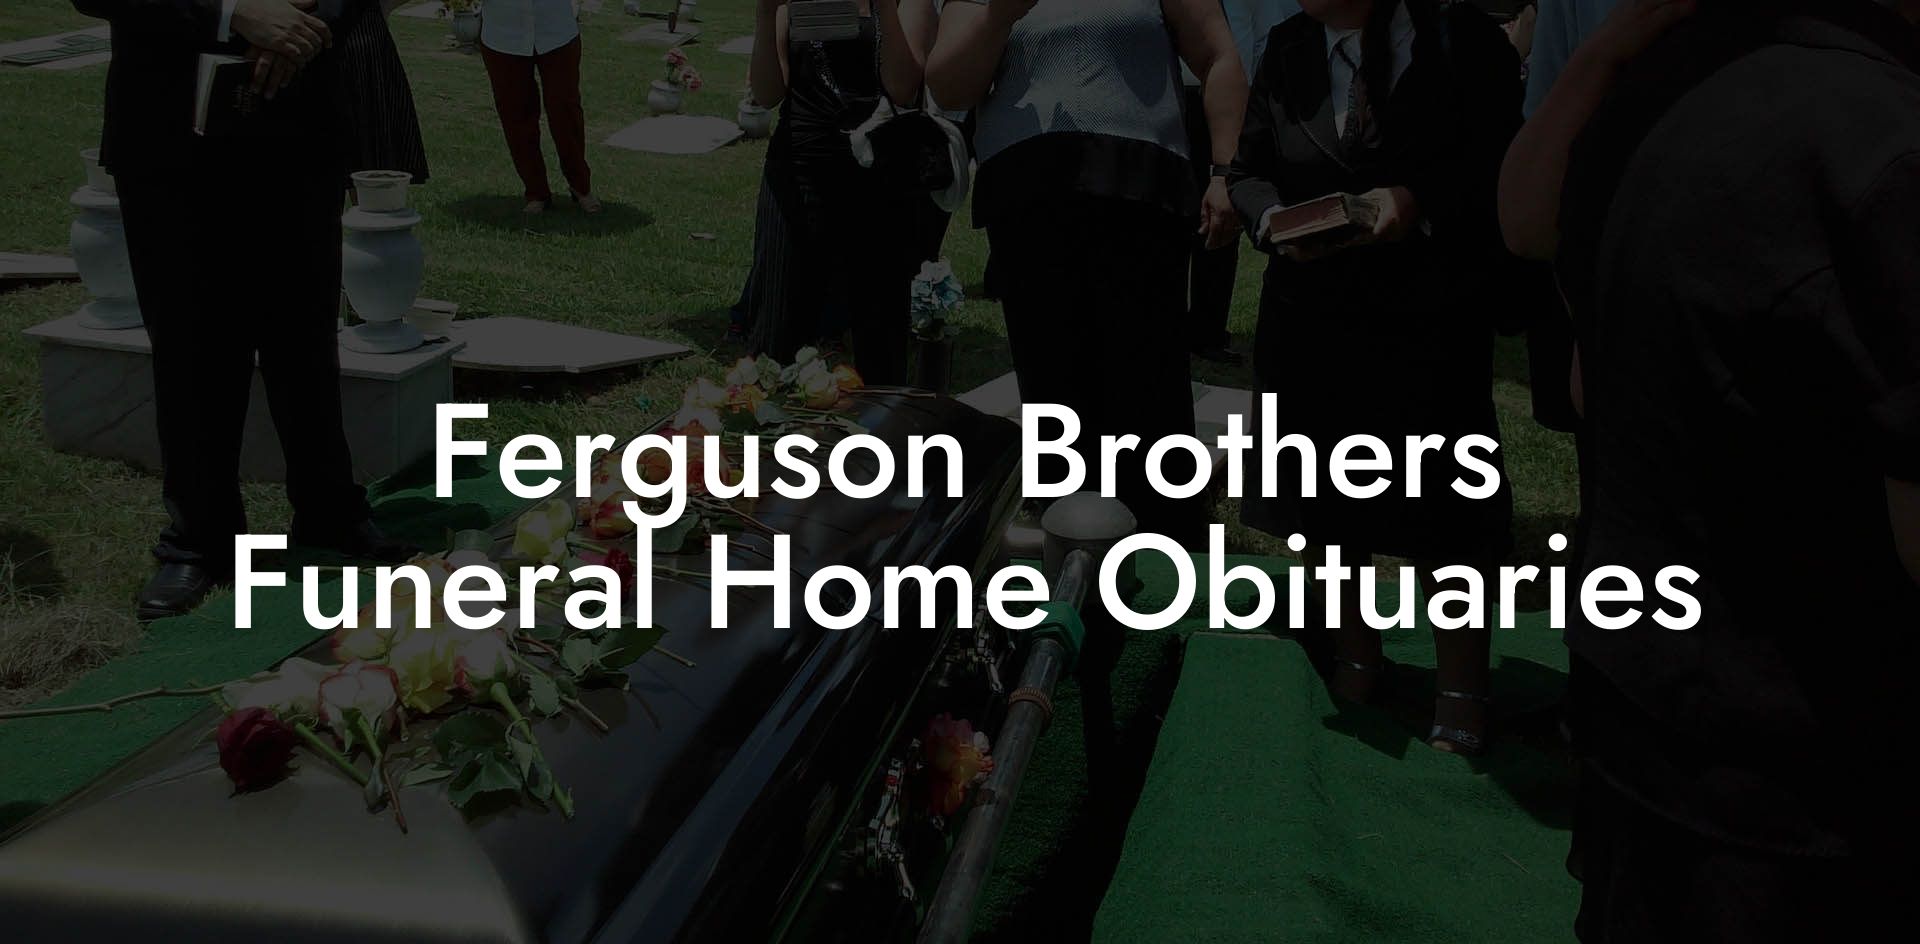 Ferguson Brothers Funeral Home Obituaries